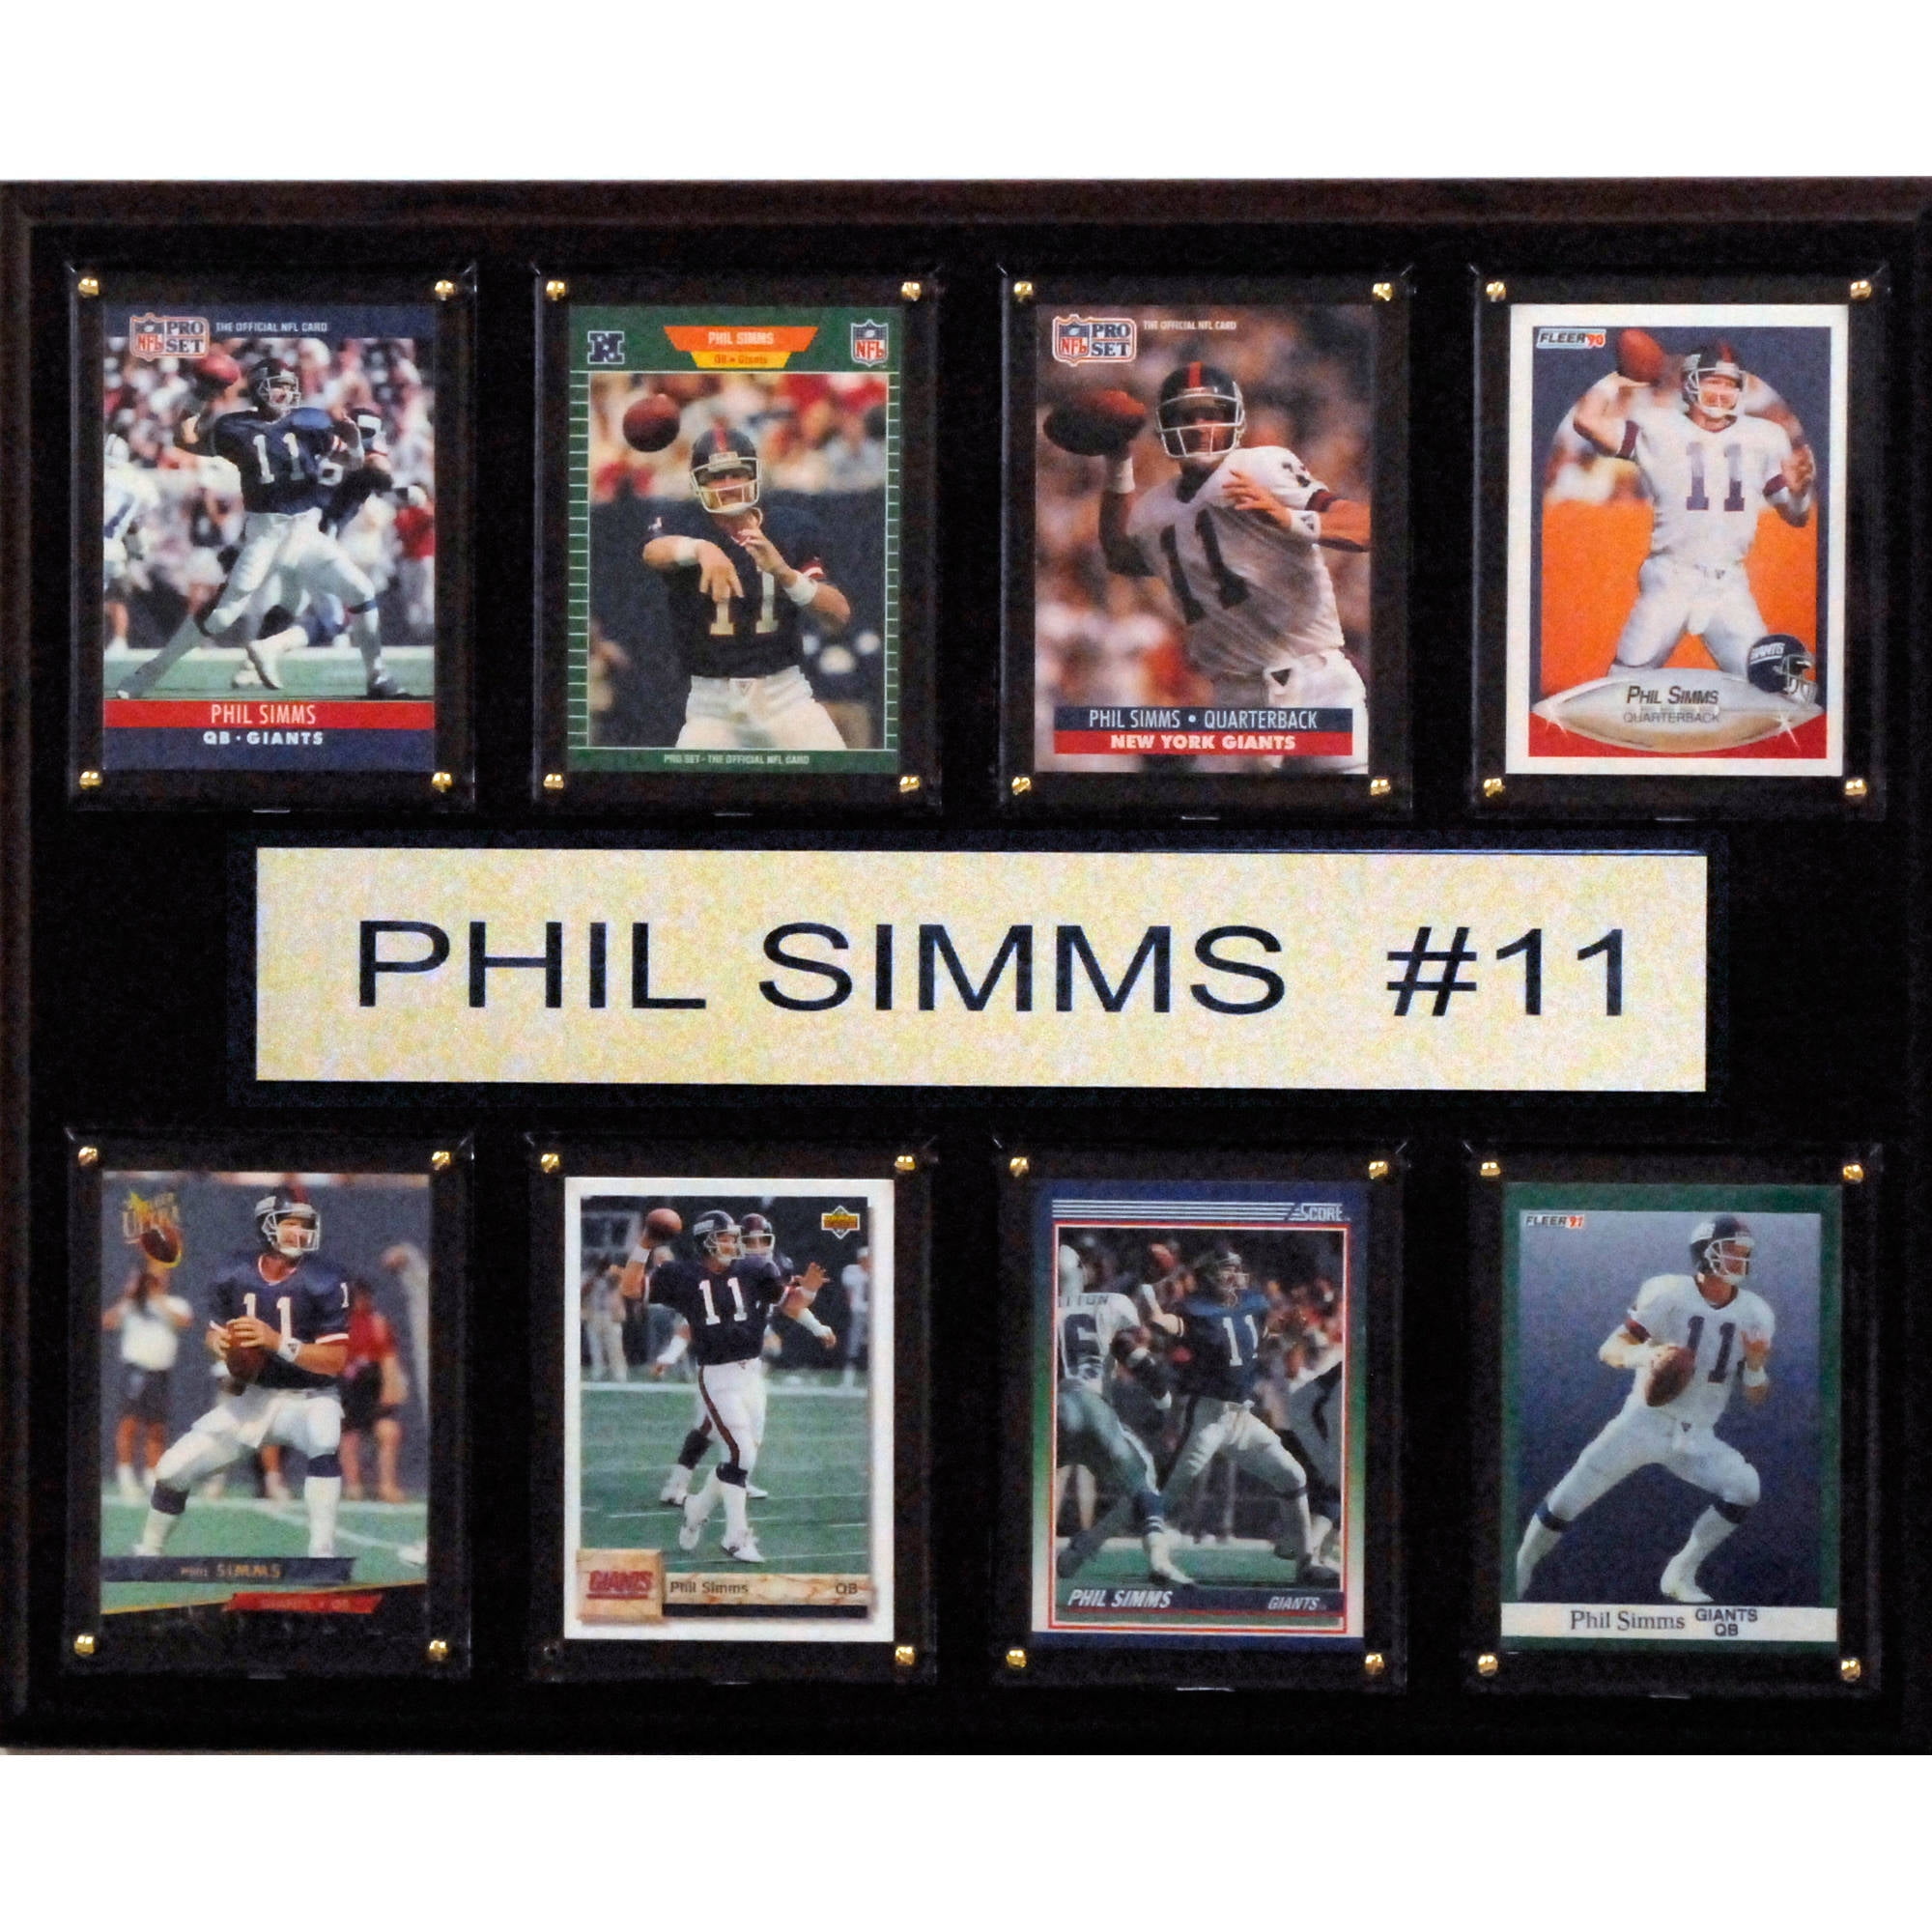 Phil Simms engraved nameplate 